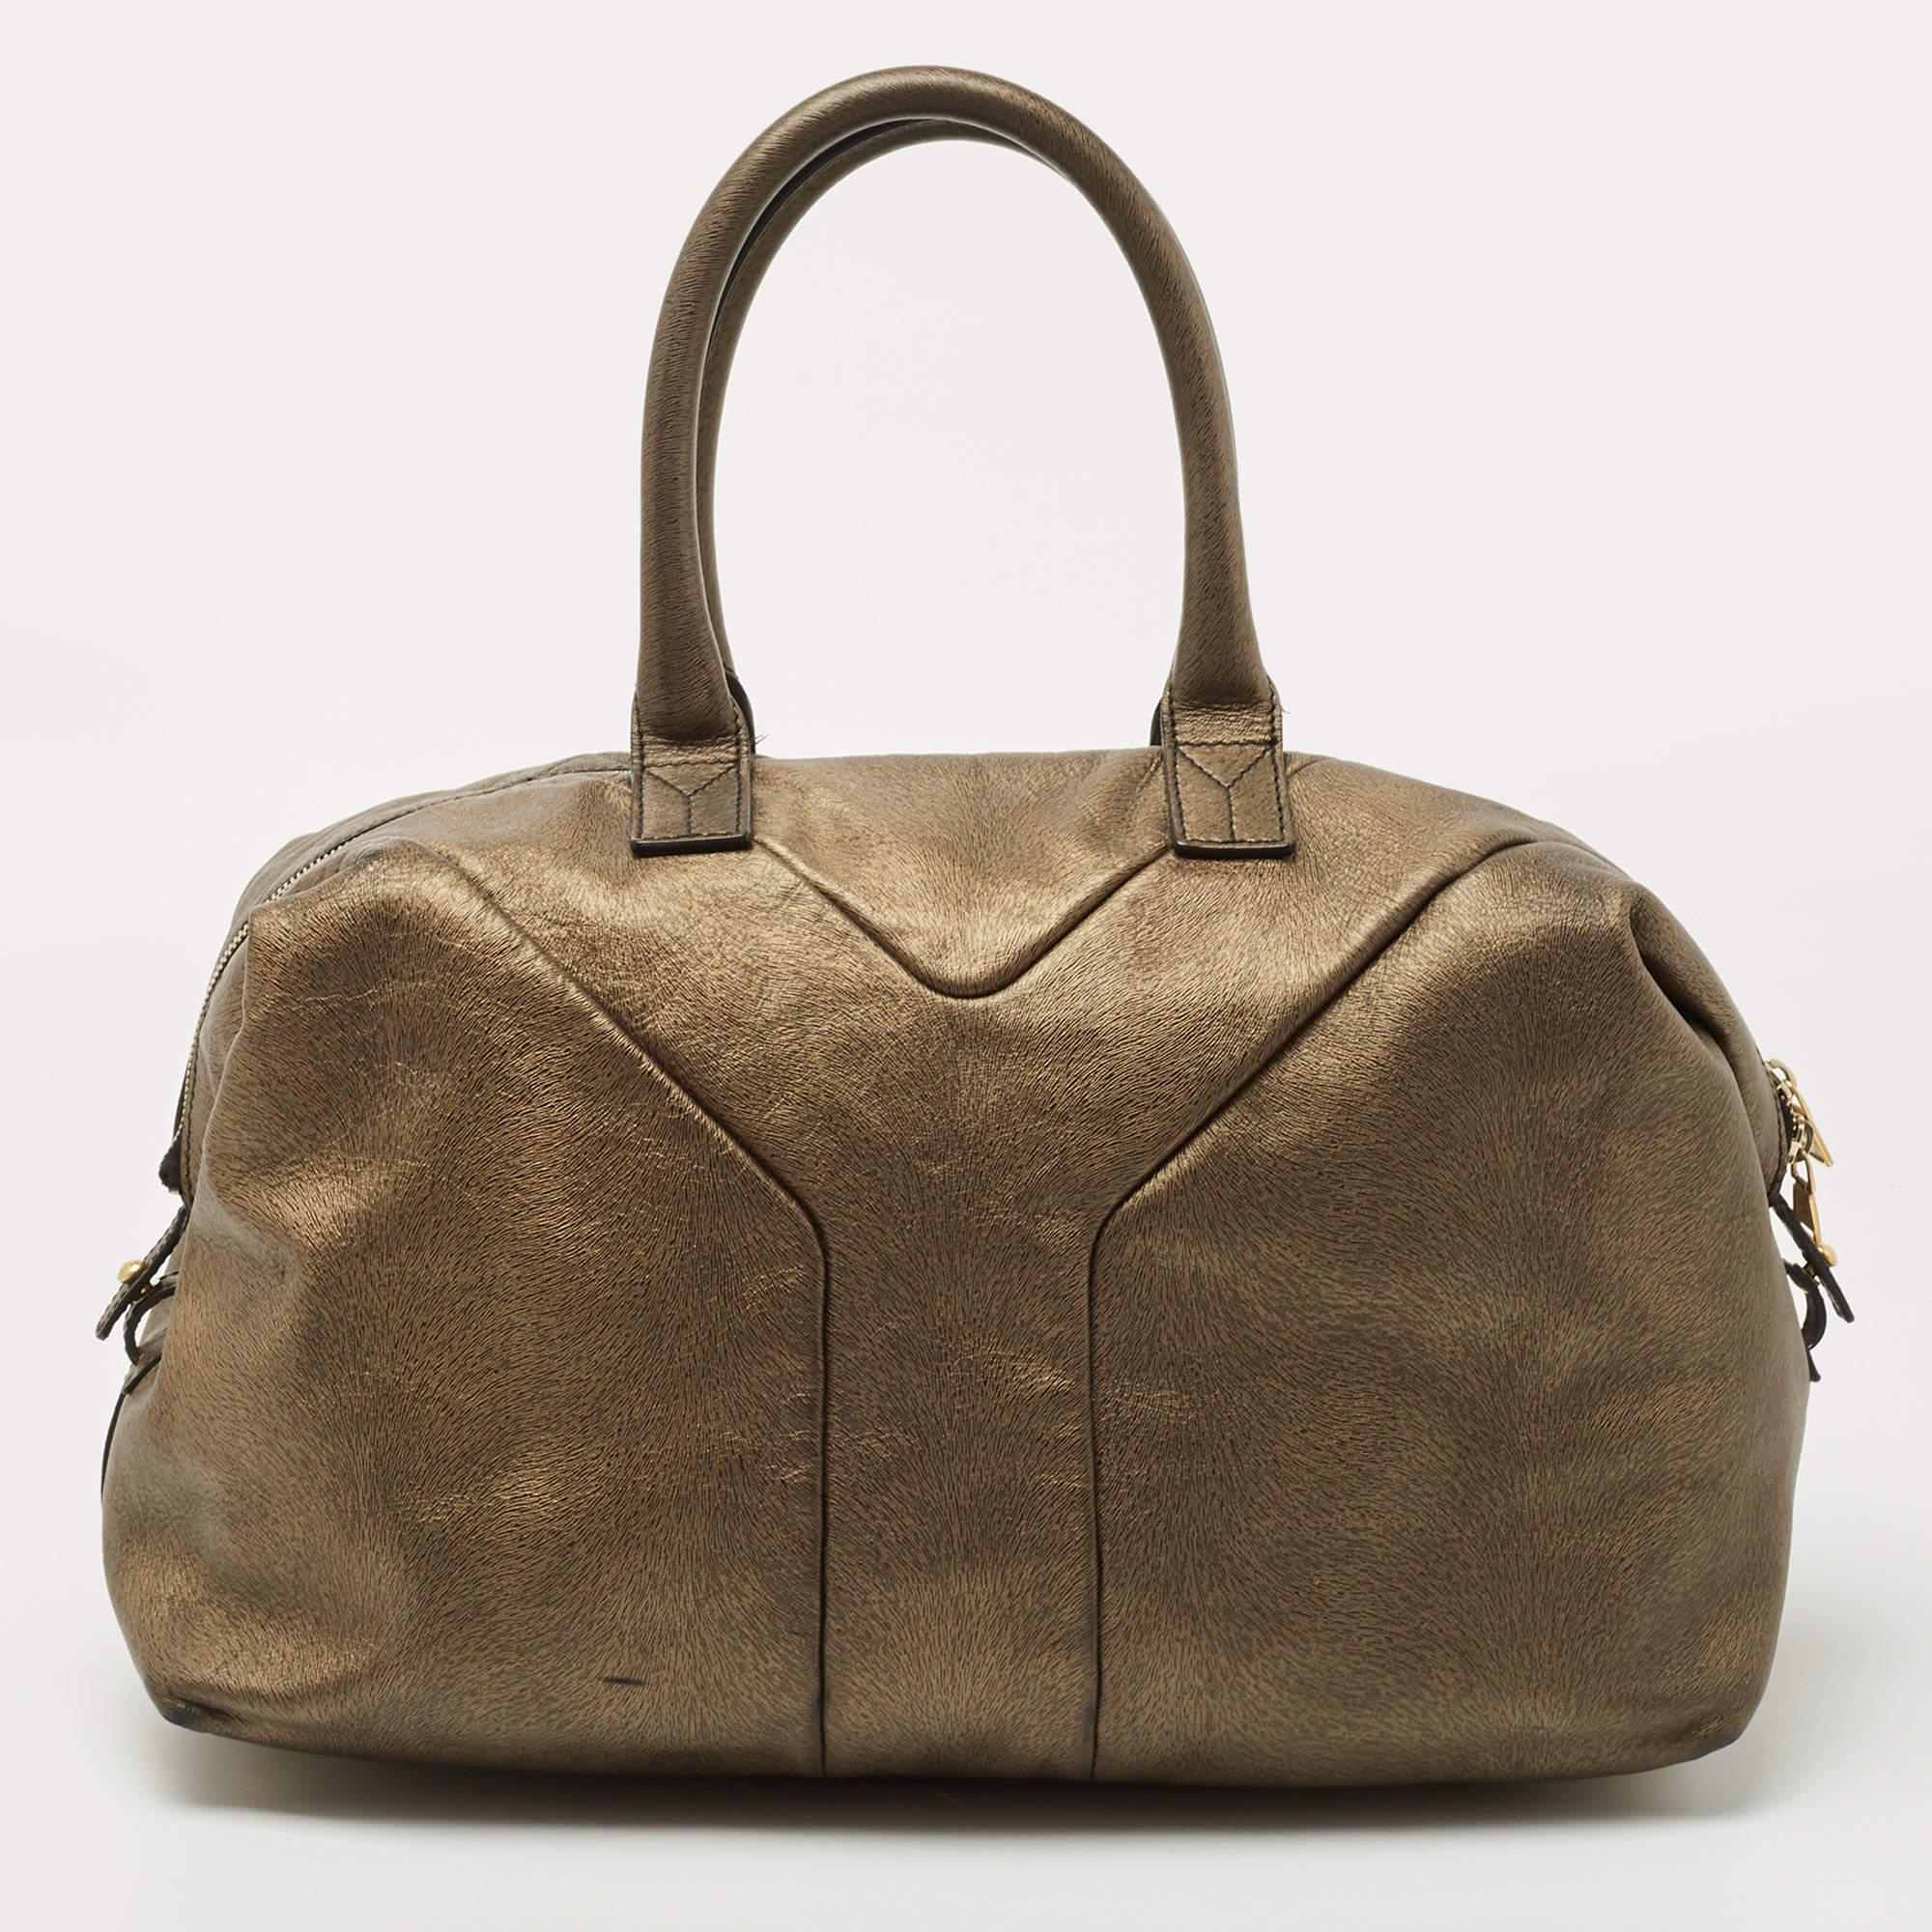 Carry this gorgeous Saint Laurent creation wherever you go and make people drool. Meticulously crafted from leather, this Easy Y has been styled with a large Y on the exterior and equipped with two top handles and a spacious fabric interior to hold